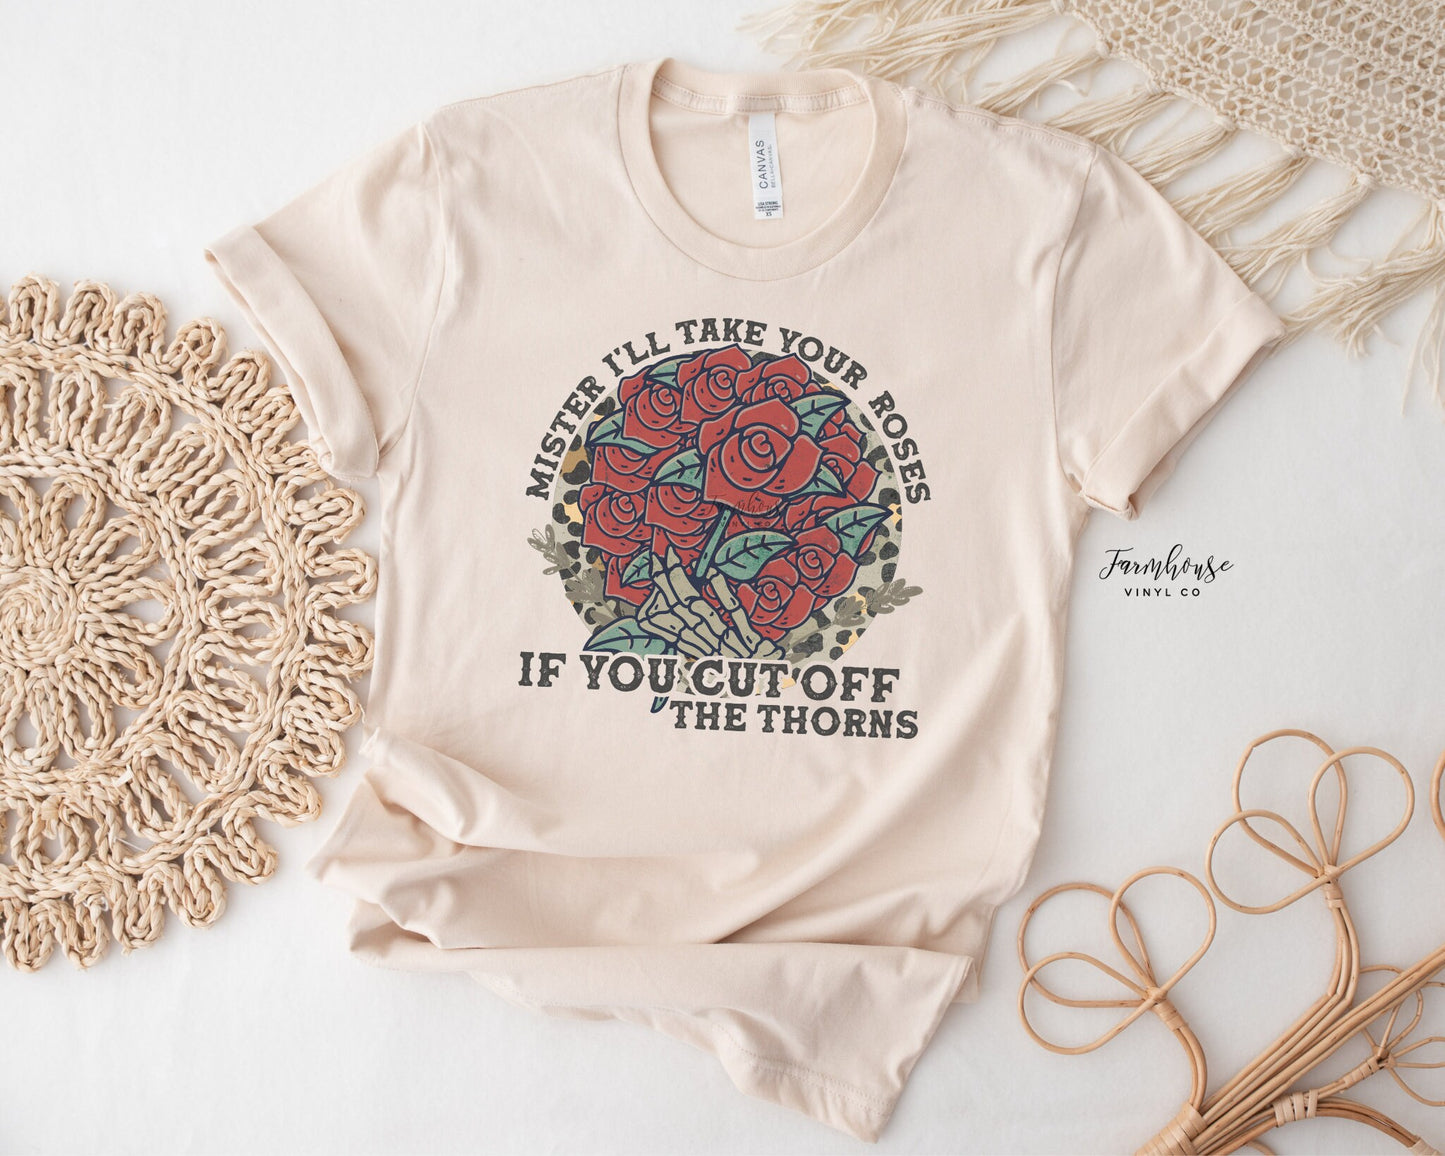 Mister I'll Take Your Roses if you Cut Off the Thorns Shirt - Farmhouse Vinyl Co